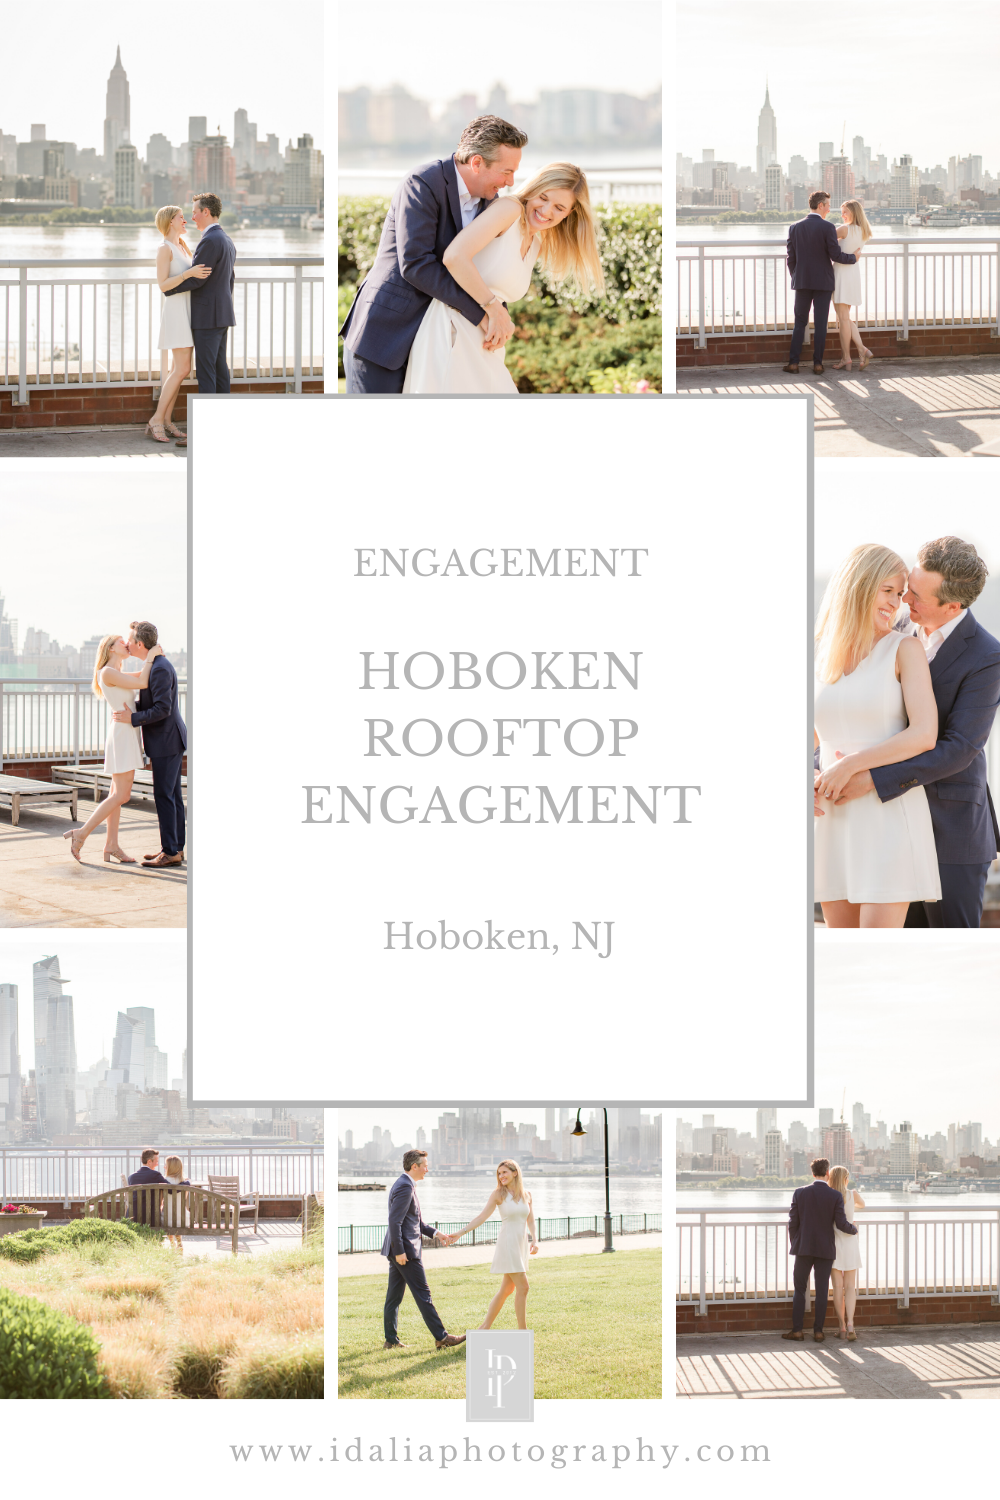 Hoboken rooftop engagement session by Idalia Photography